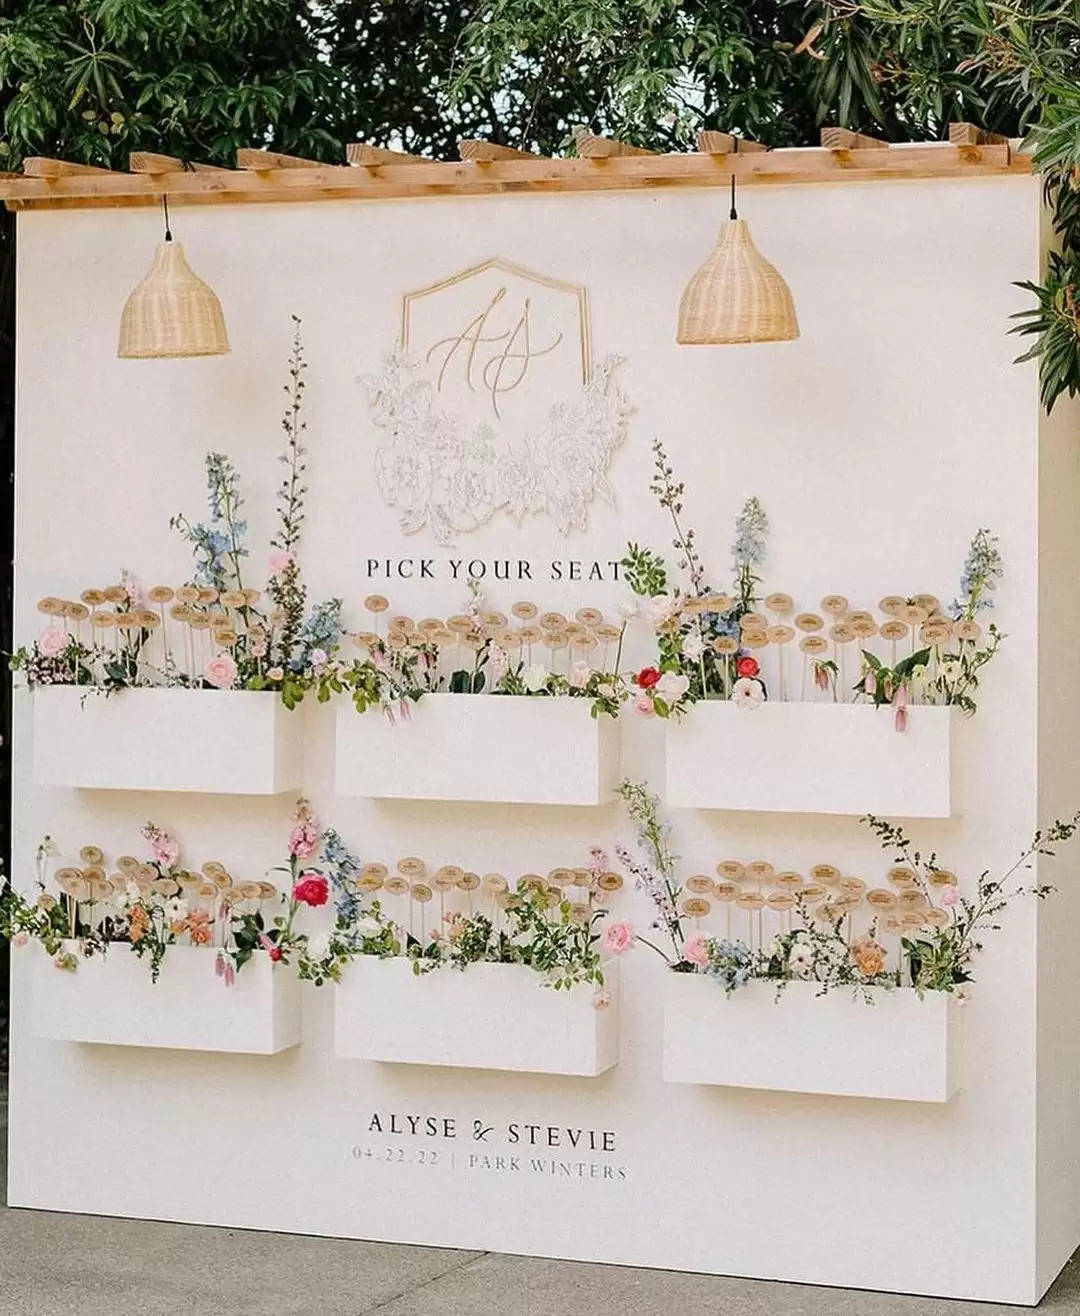 Personalise Your Wedding ceremony Decor With Charming Indicators